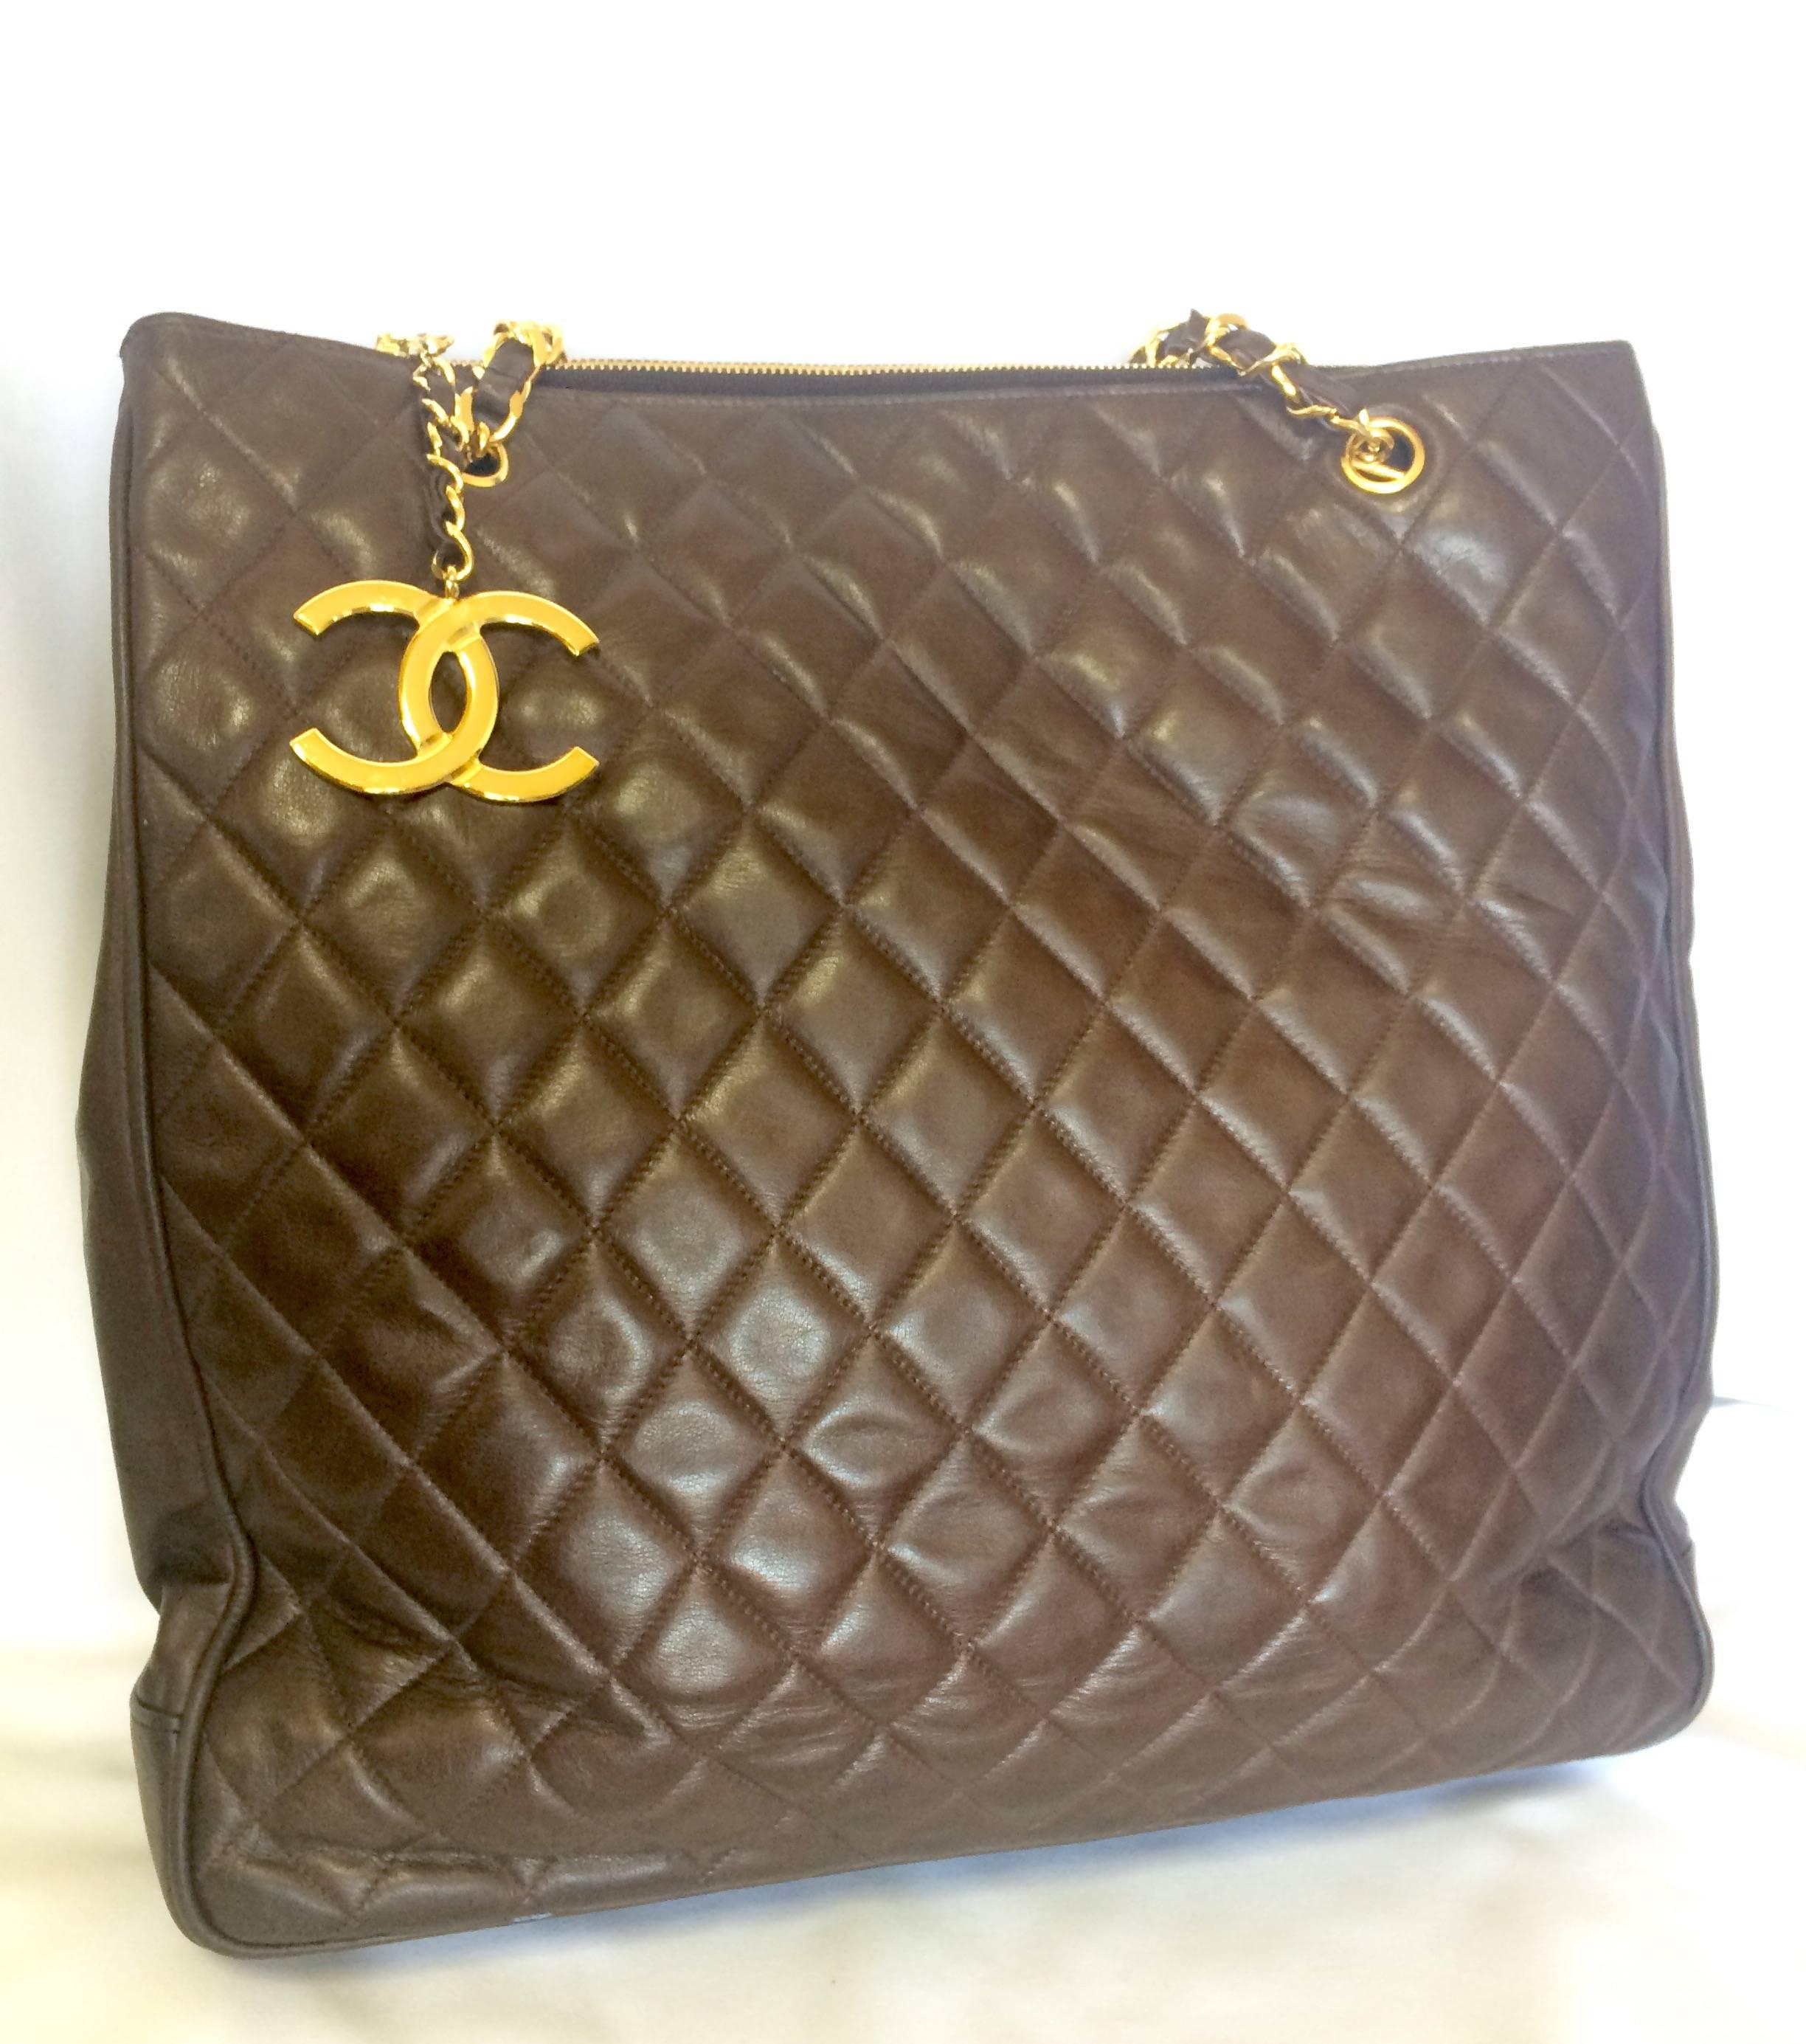 1990s. Vintage CHANEL brown lambskin large tote bag with gold tone chains and jumbo CC mark charm to the LAMPO zipper. Classic purse.

Introducing a vintage CHANEL brown color lamb leather large tote bag from the early 90's.

Featuring its iconic